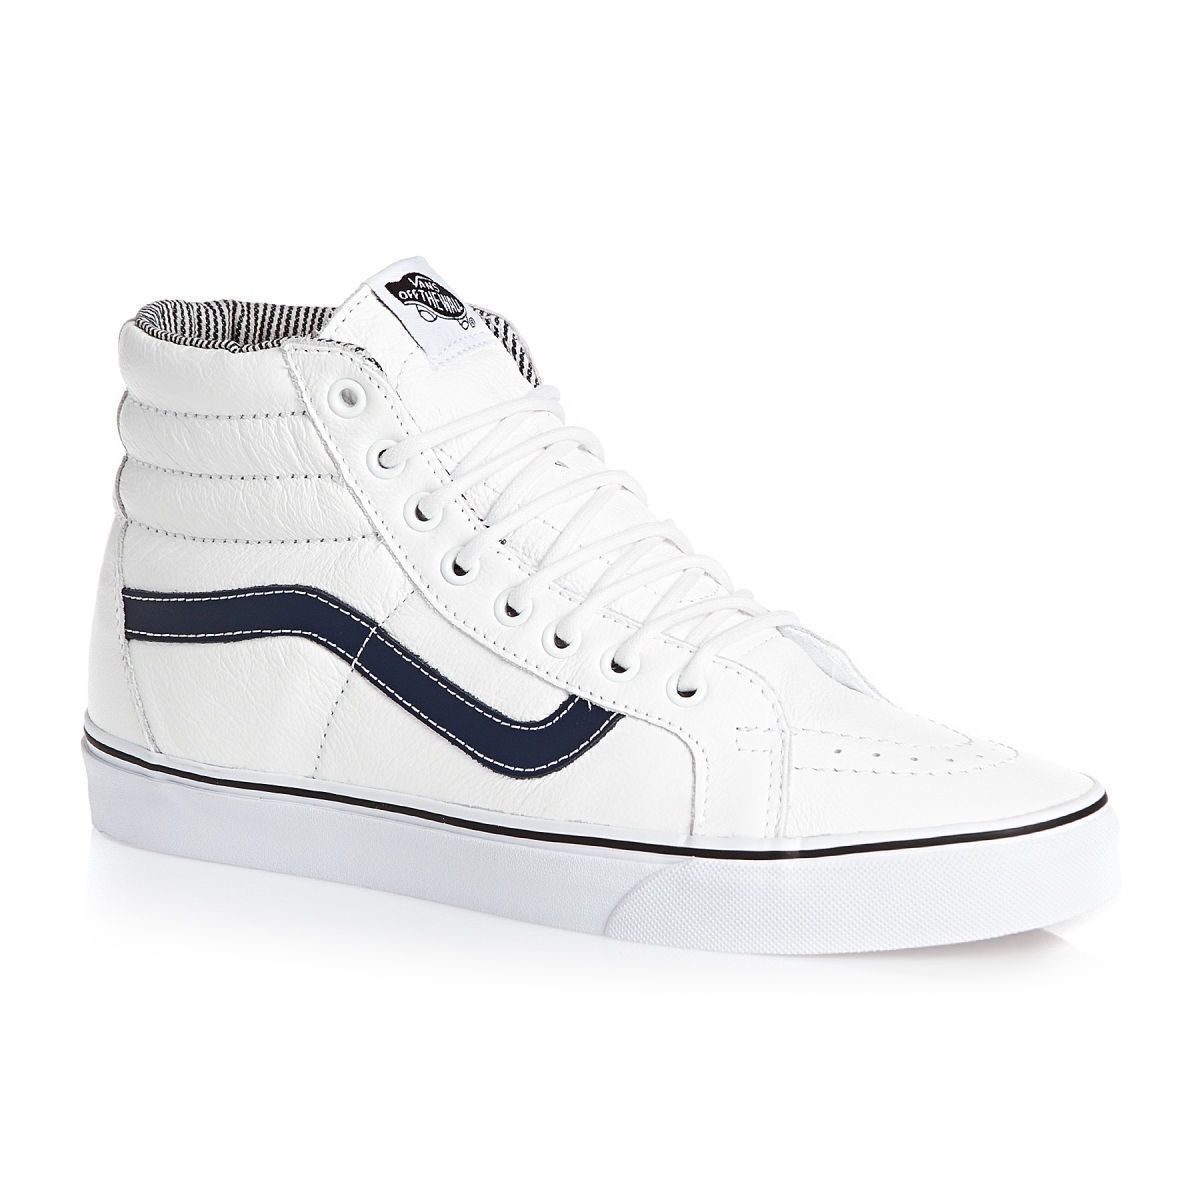 white leather vans with black stripe 